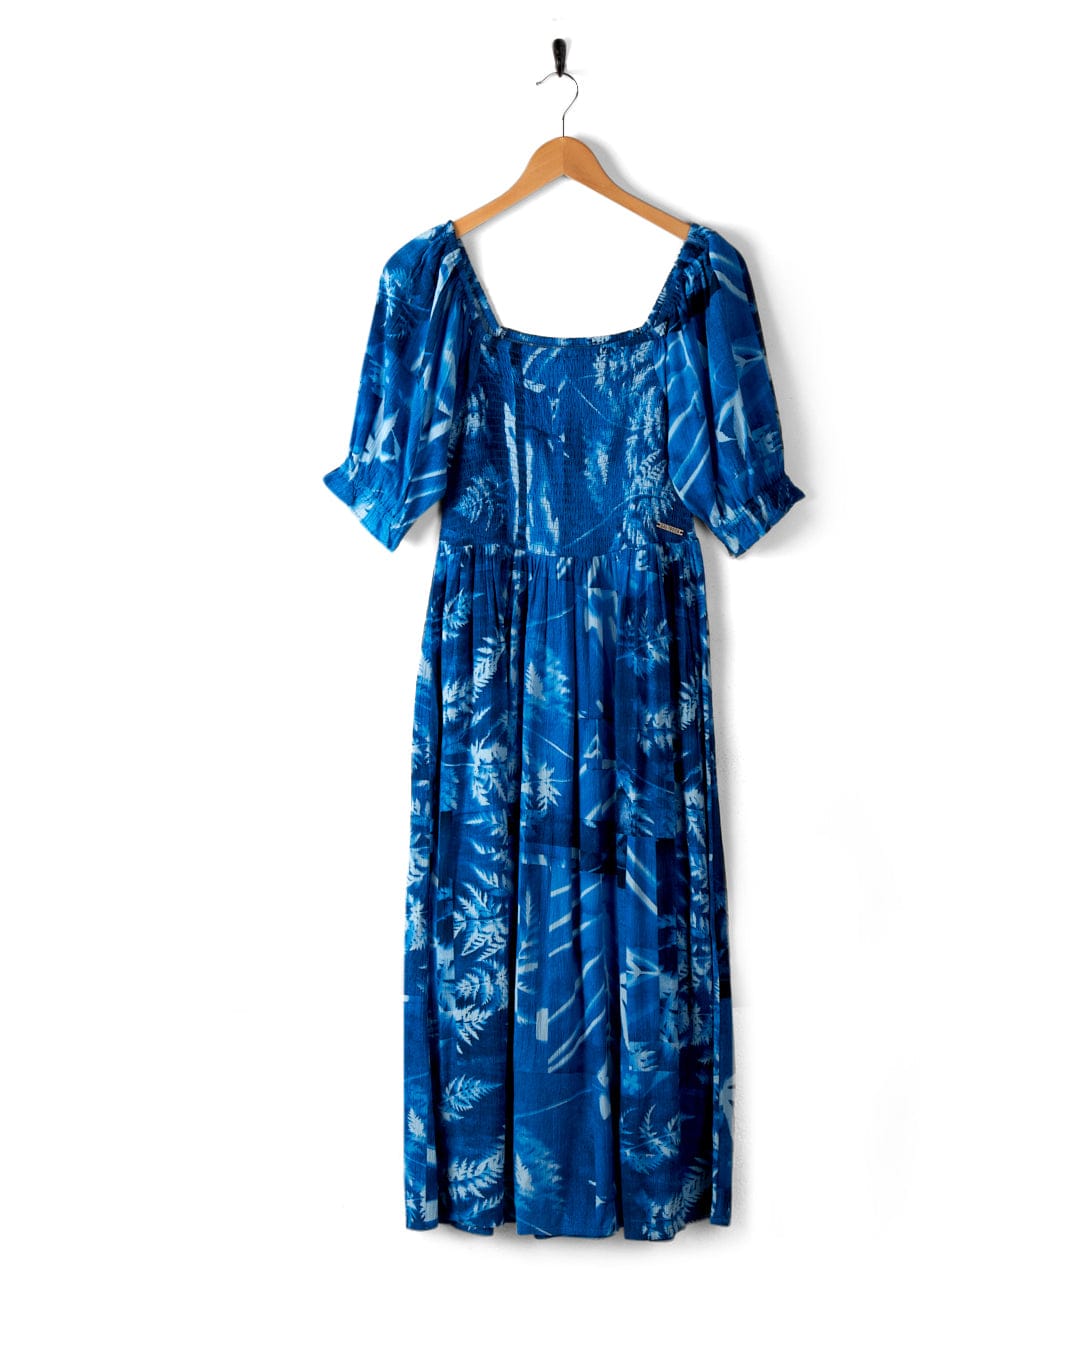 A Larran Cyanotype - Midi Woven Dress - Blue by Saltrock with short sleeves and a square neckline, hanging on a wooden hanger against a white background.